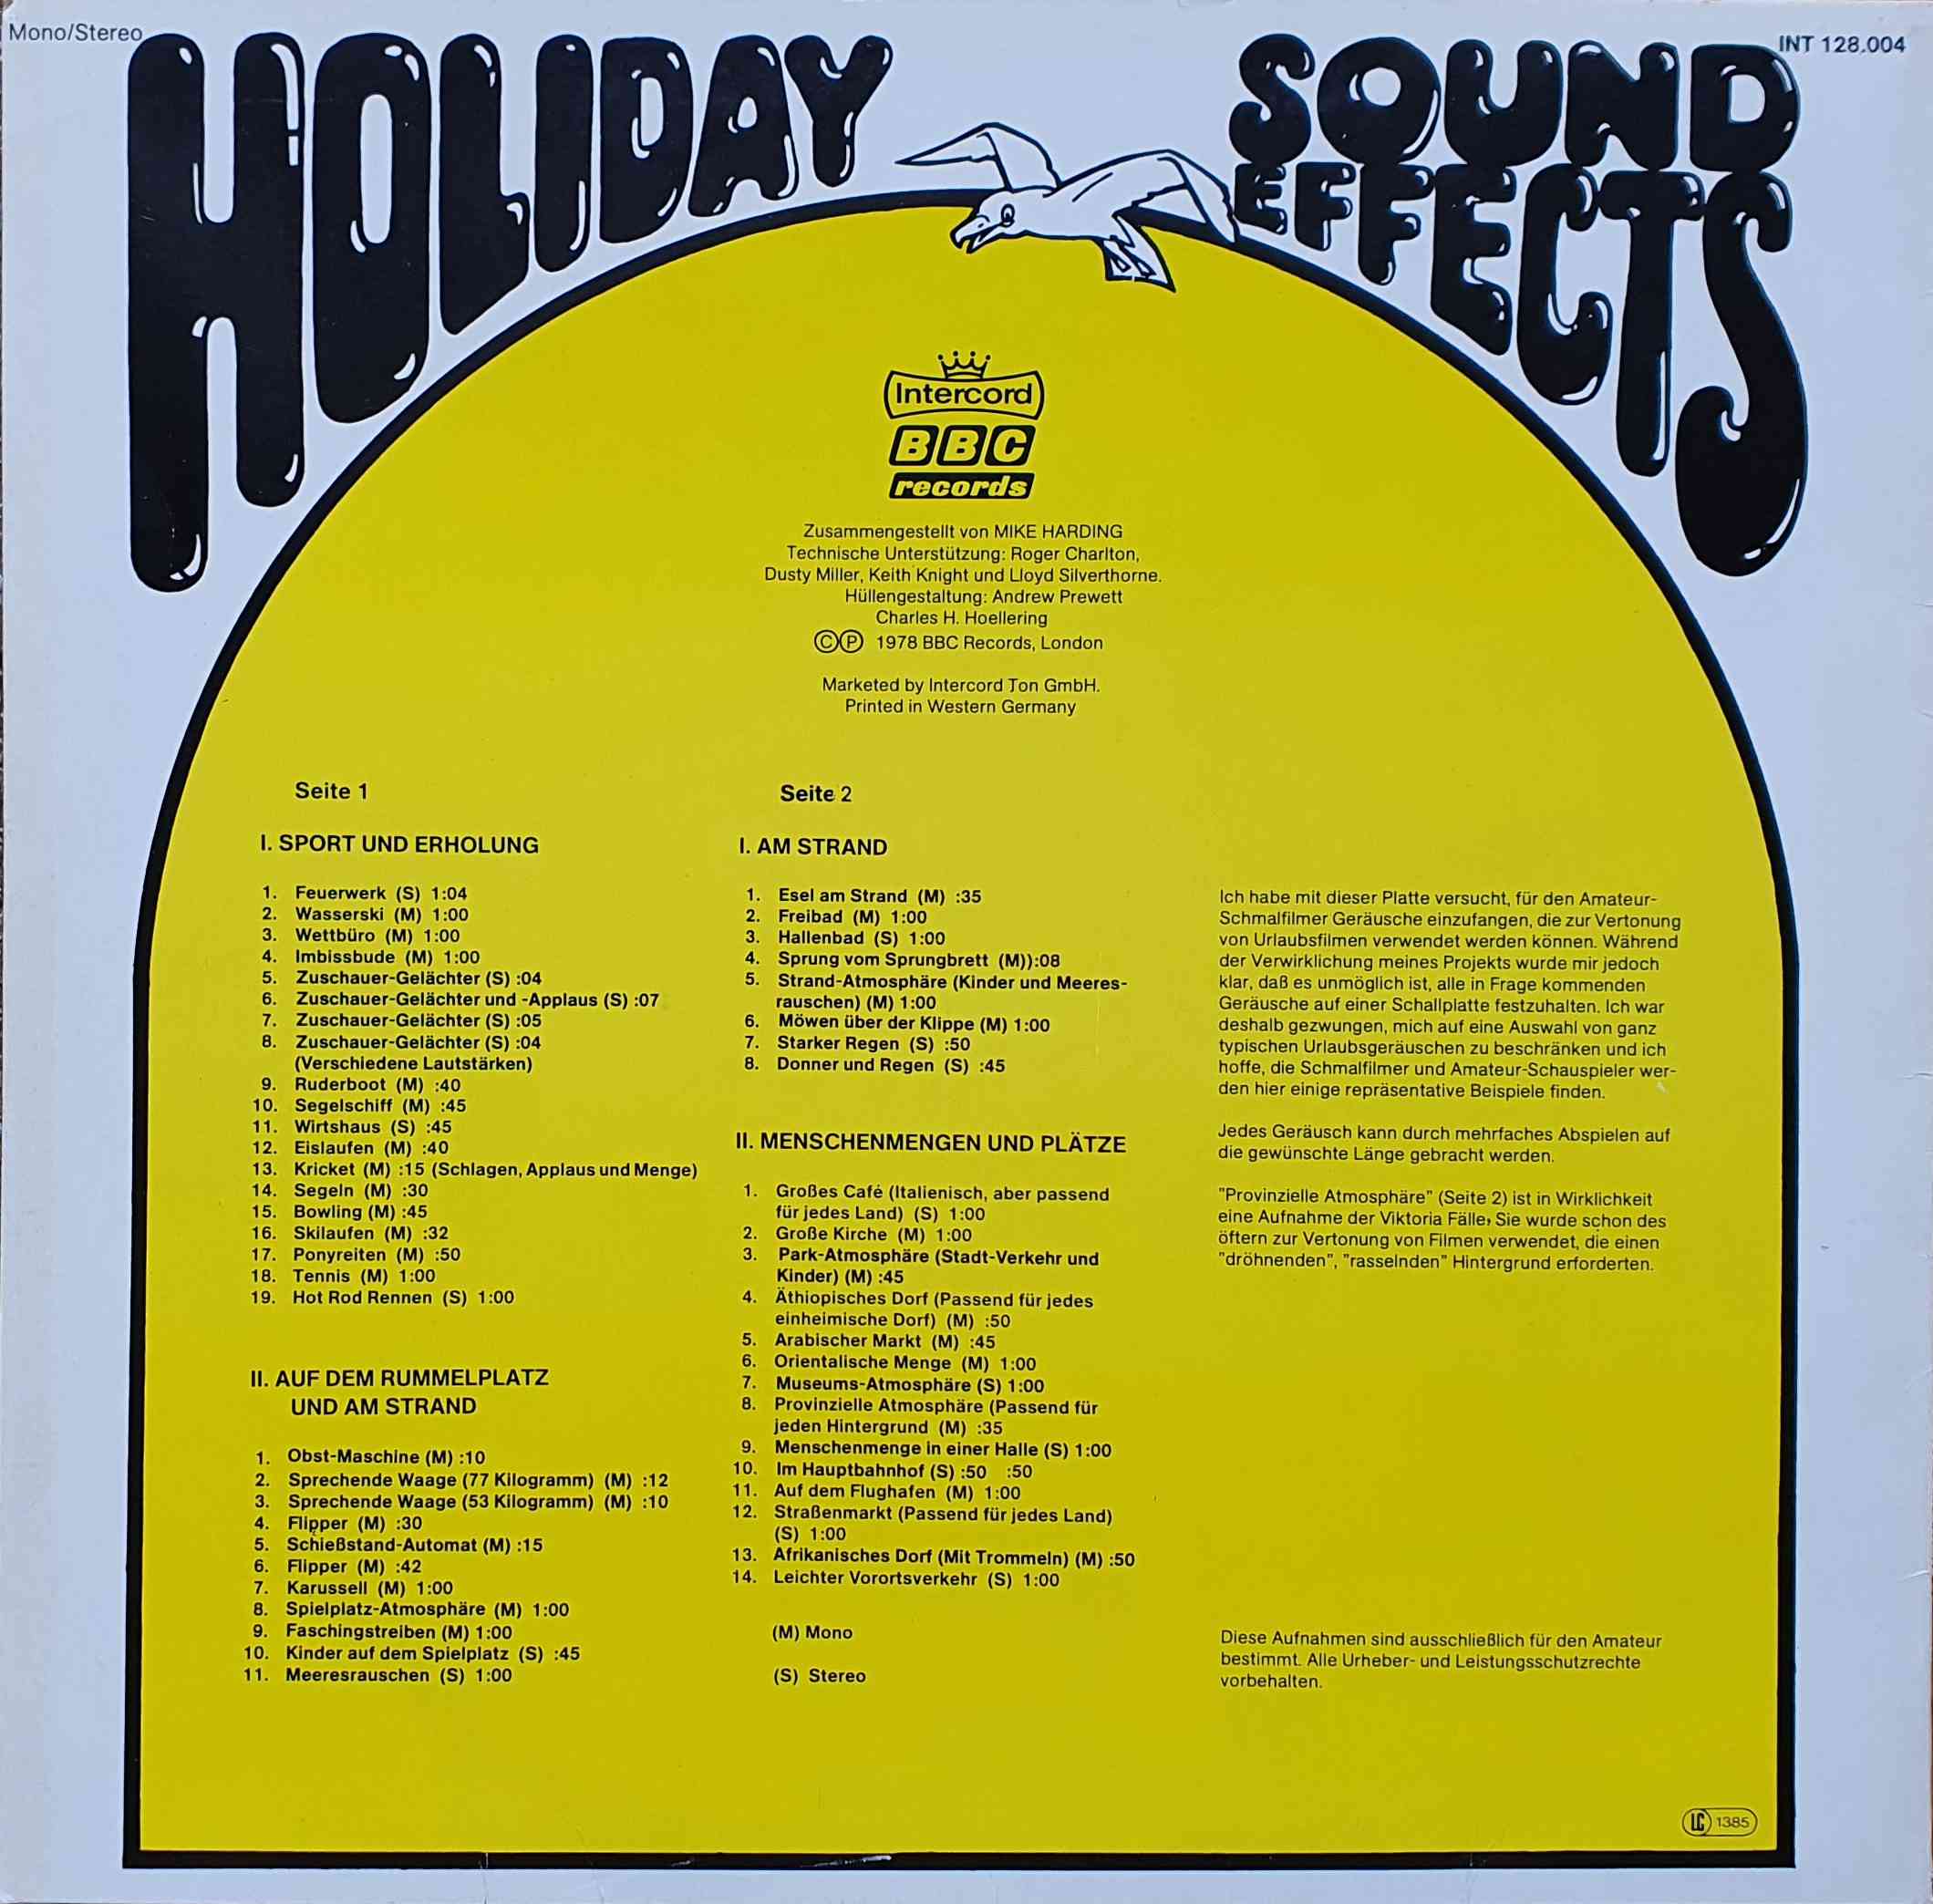 Picture of INT 128.004 Sound effects - Holiday sounds by artist Various from the BBC records and Tapes library